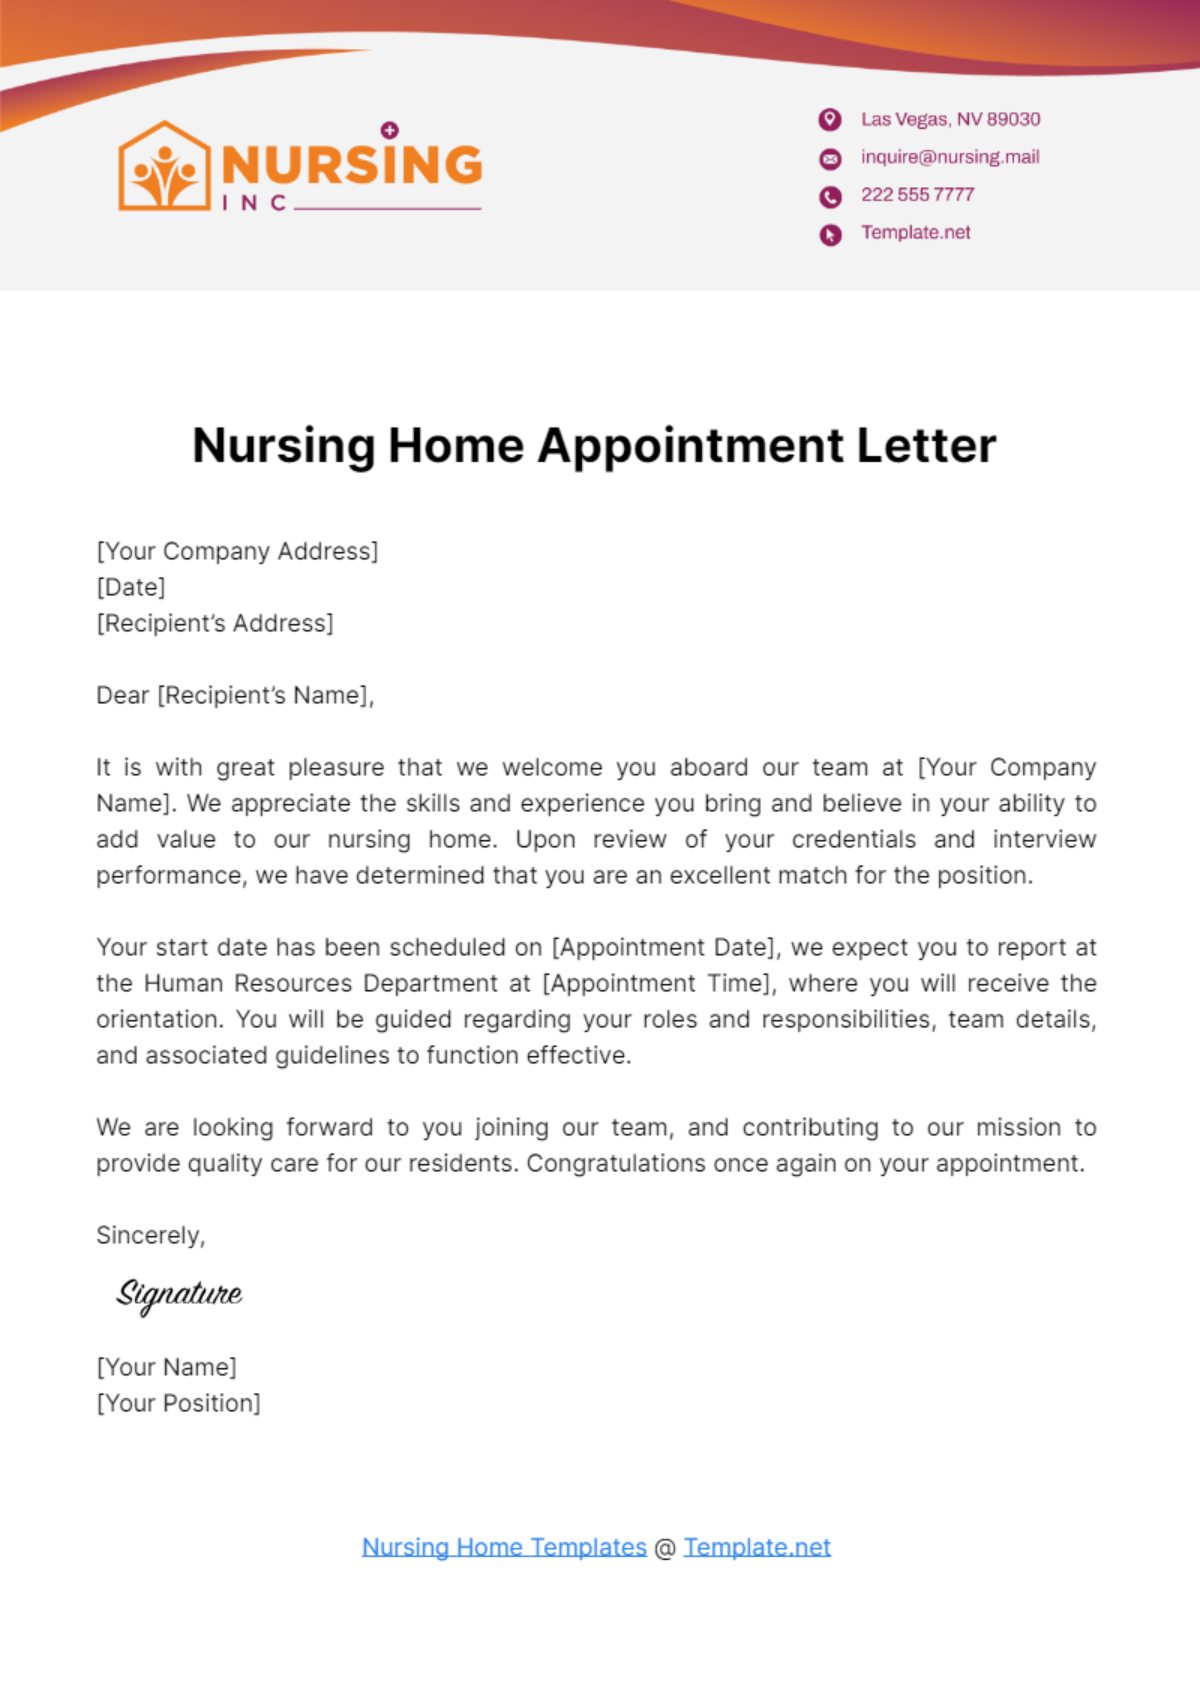 Nursing Home Appointment Letter Template